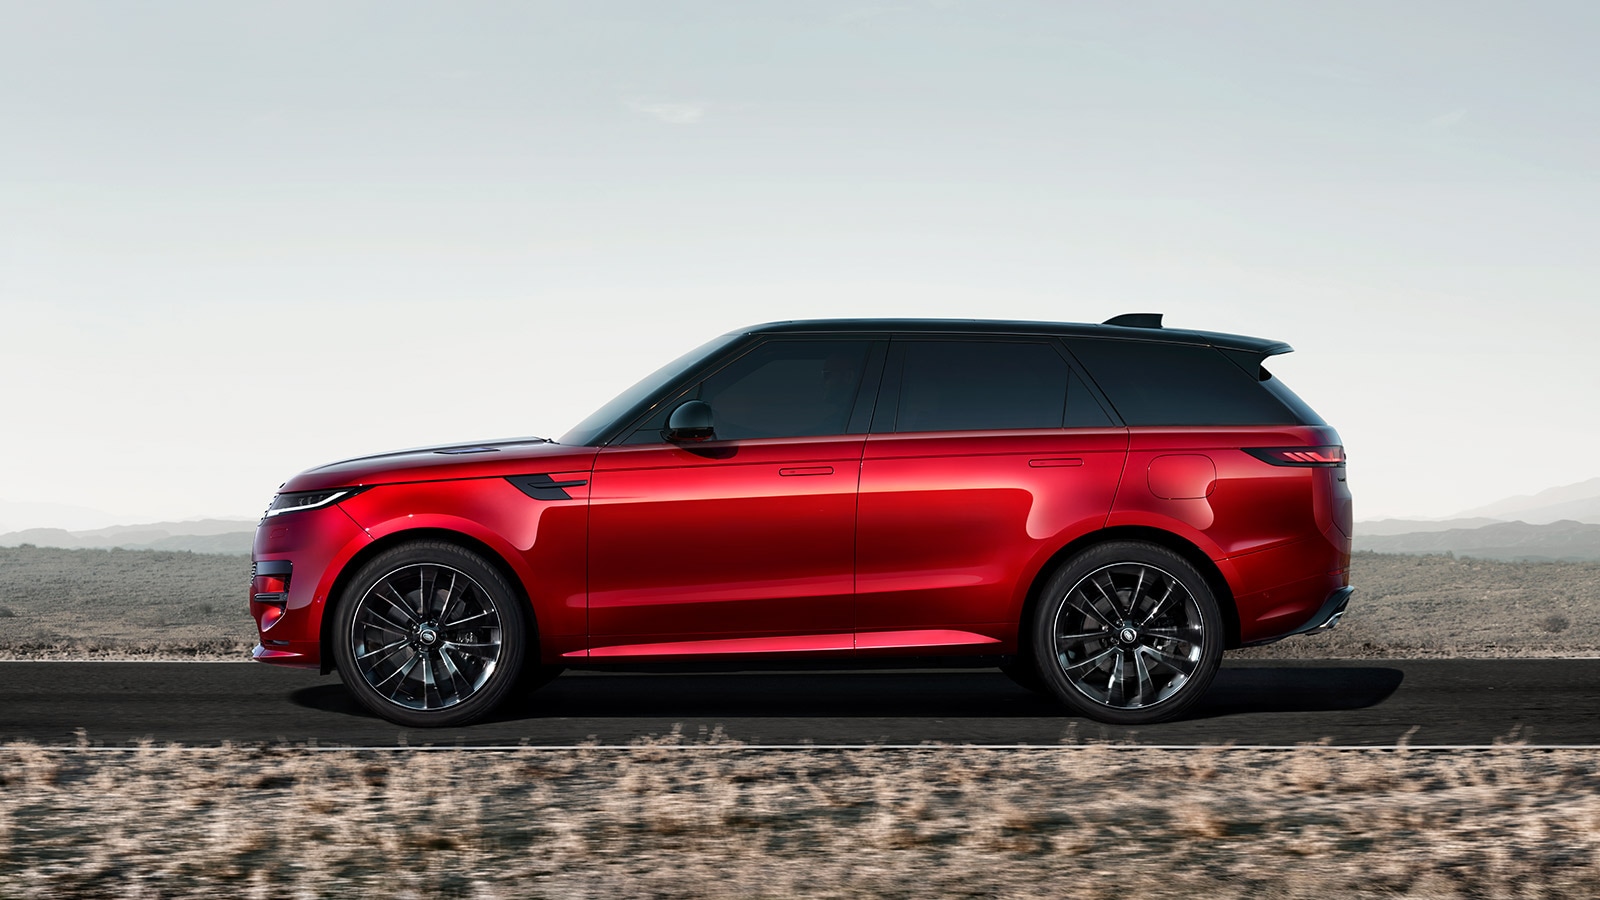 Range Rover Sport adds technology, power with · Select Engineering